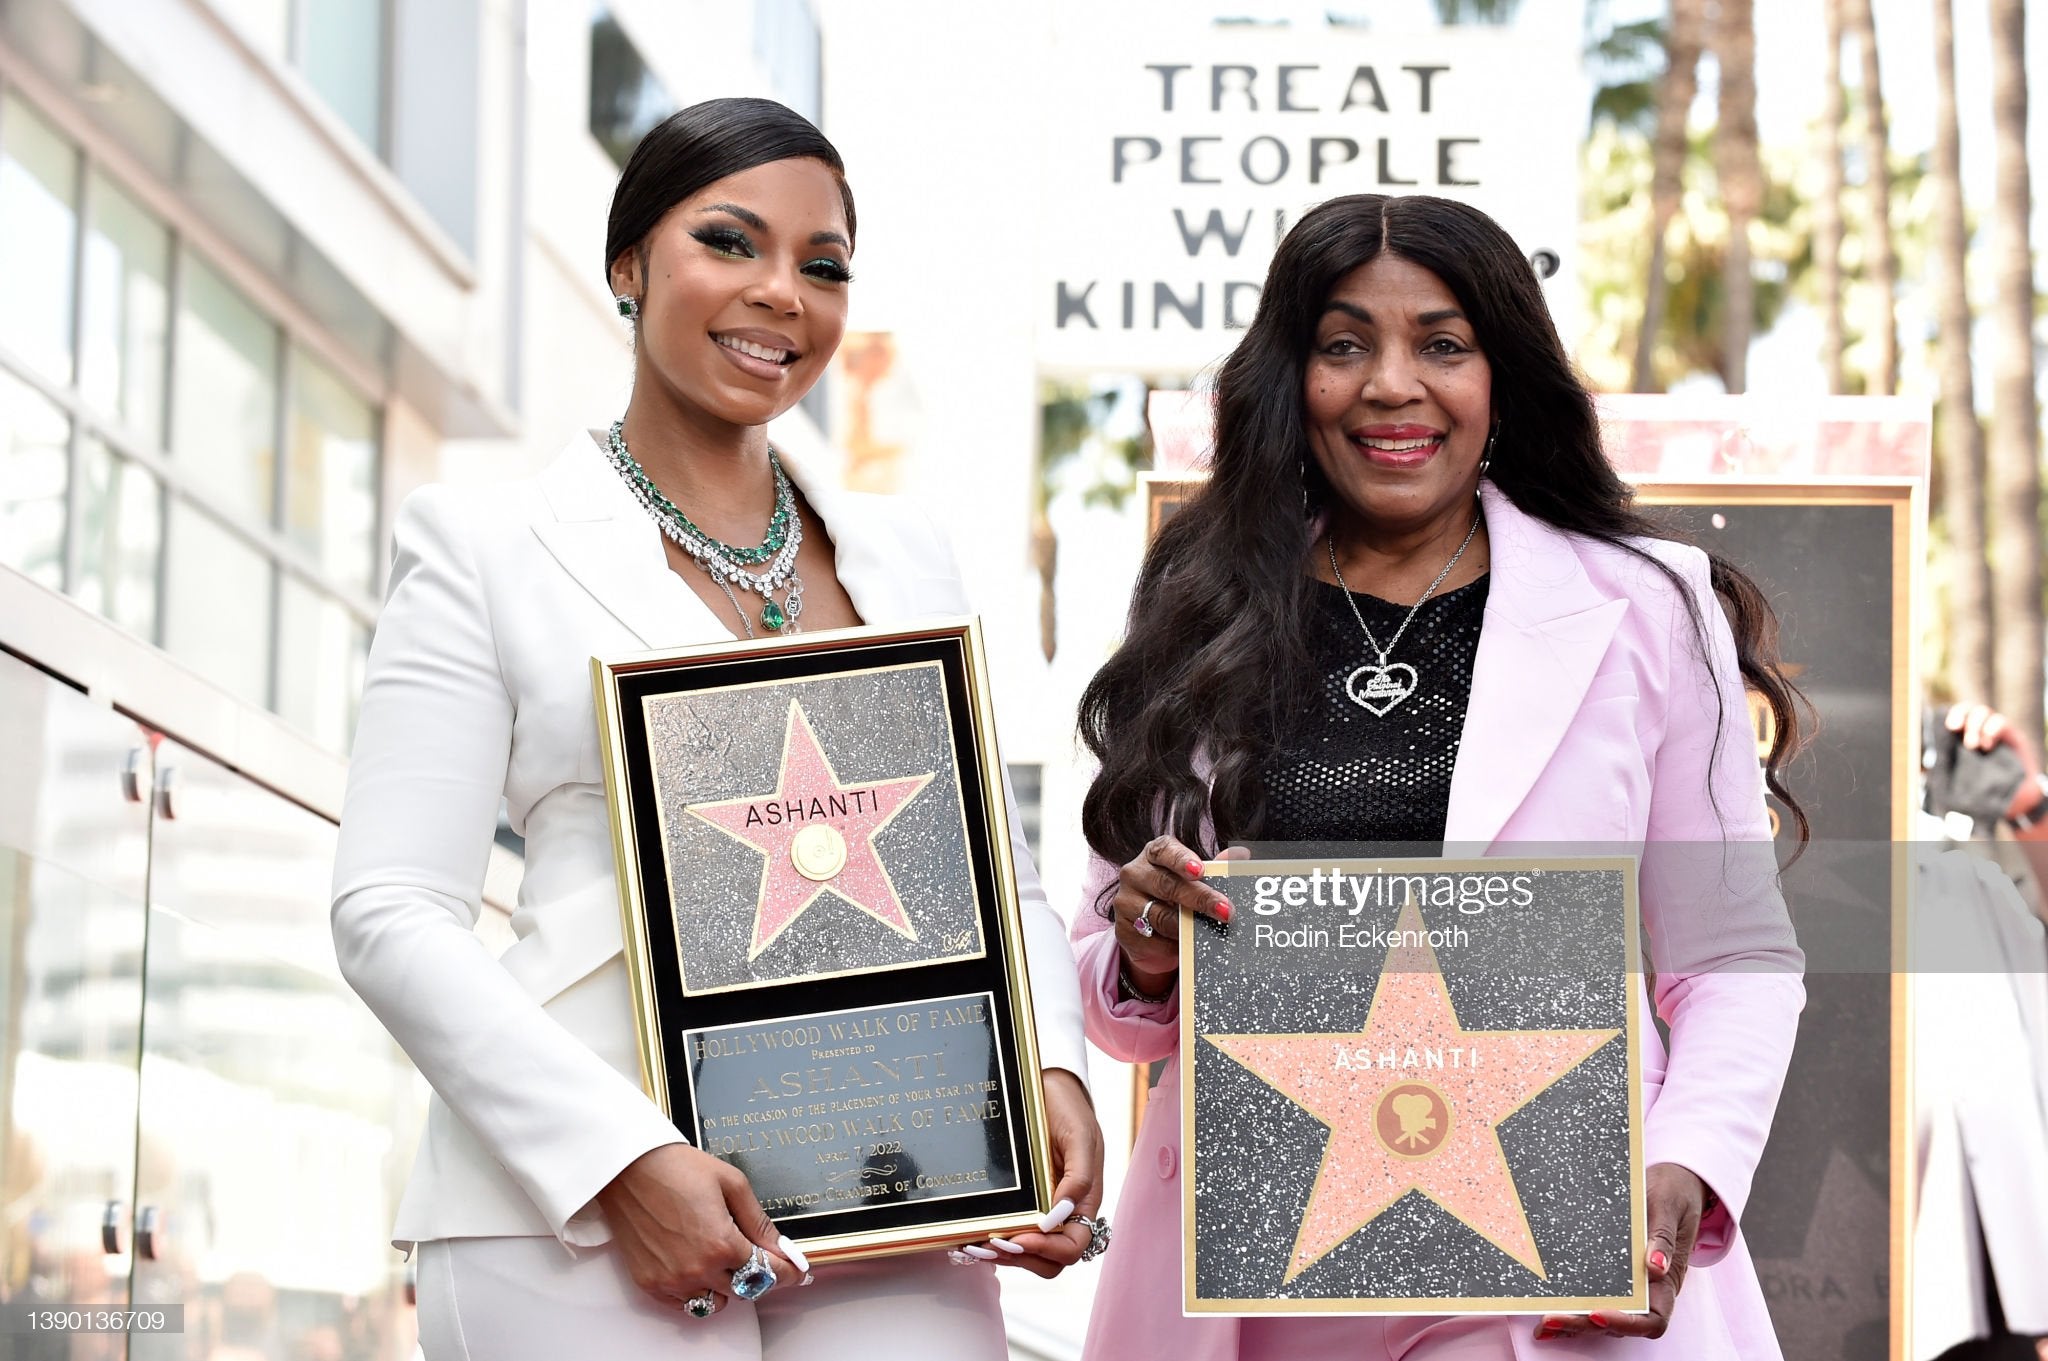 Ashanti and her mother attended the ceremony